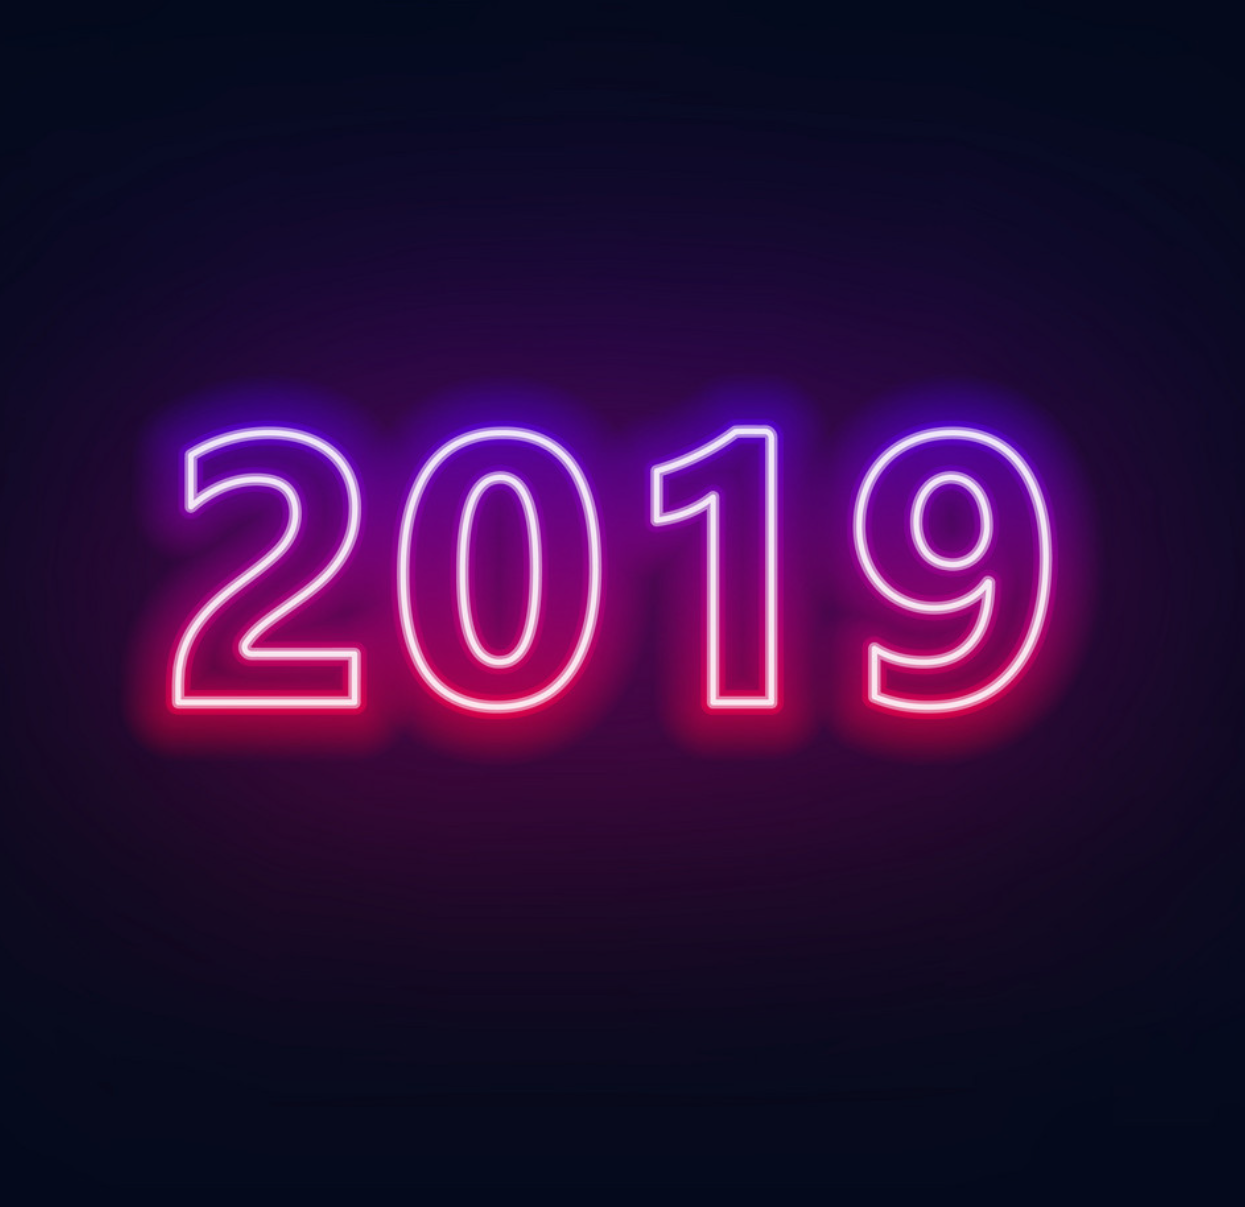 2019 in neon pink and purple on a black background.